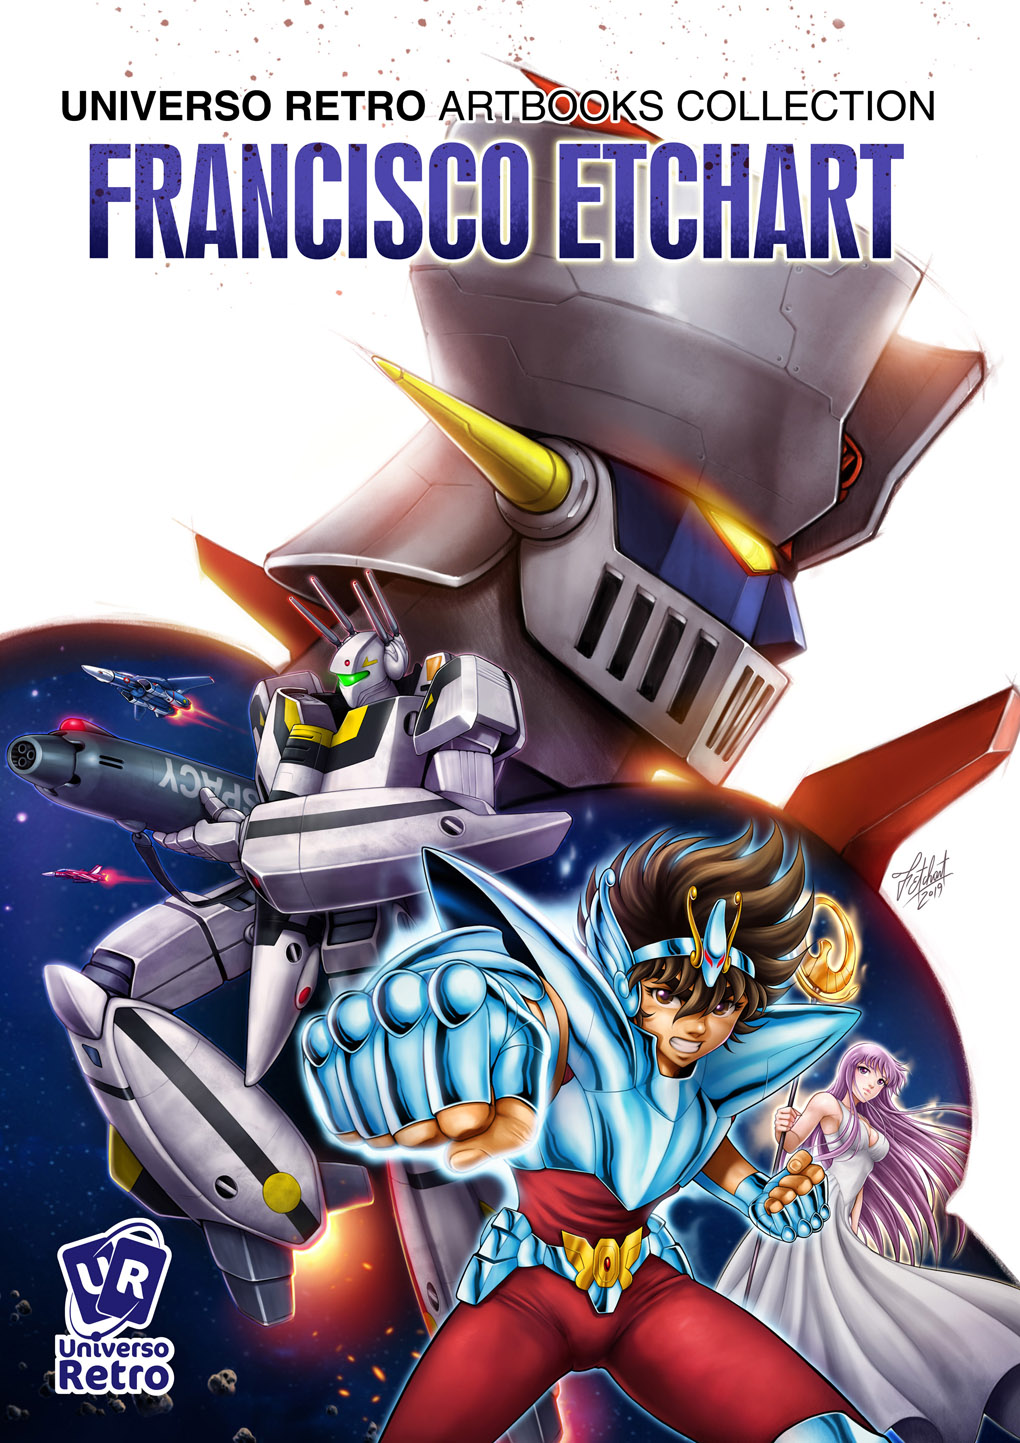 1980s_(style) 1boy 1girl armor artbook athena_(saint_seiya) battroid brown_hair choujikuu_yousai_macross dress energy energy_cannon english_commentary english_text fighting_stance fingerless_gloves fleet flying franciscoetchart gloves glowing glowing_eyes grin gunpod highres logo long_hair looking_at_viewer macross martial_arts mazinger_(series) mazinger_z mazinger_z_(mecha) mecha pegasus_seiya punching purple_hair retro_artstyle robot robotech roundel saint_seiya science_fiction serious signature smile spanish_text spiked_hair super_robot u.n._spacy upper_body variable_fighter vf-1 vf-1a vf-1s